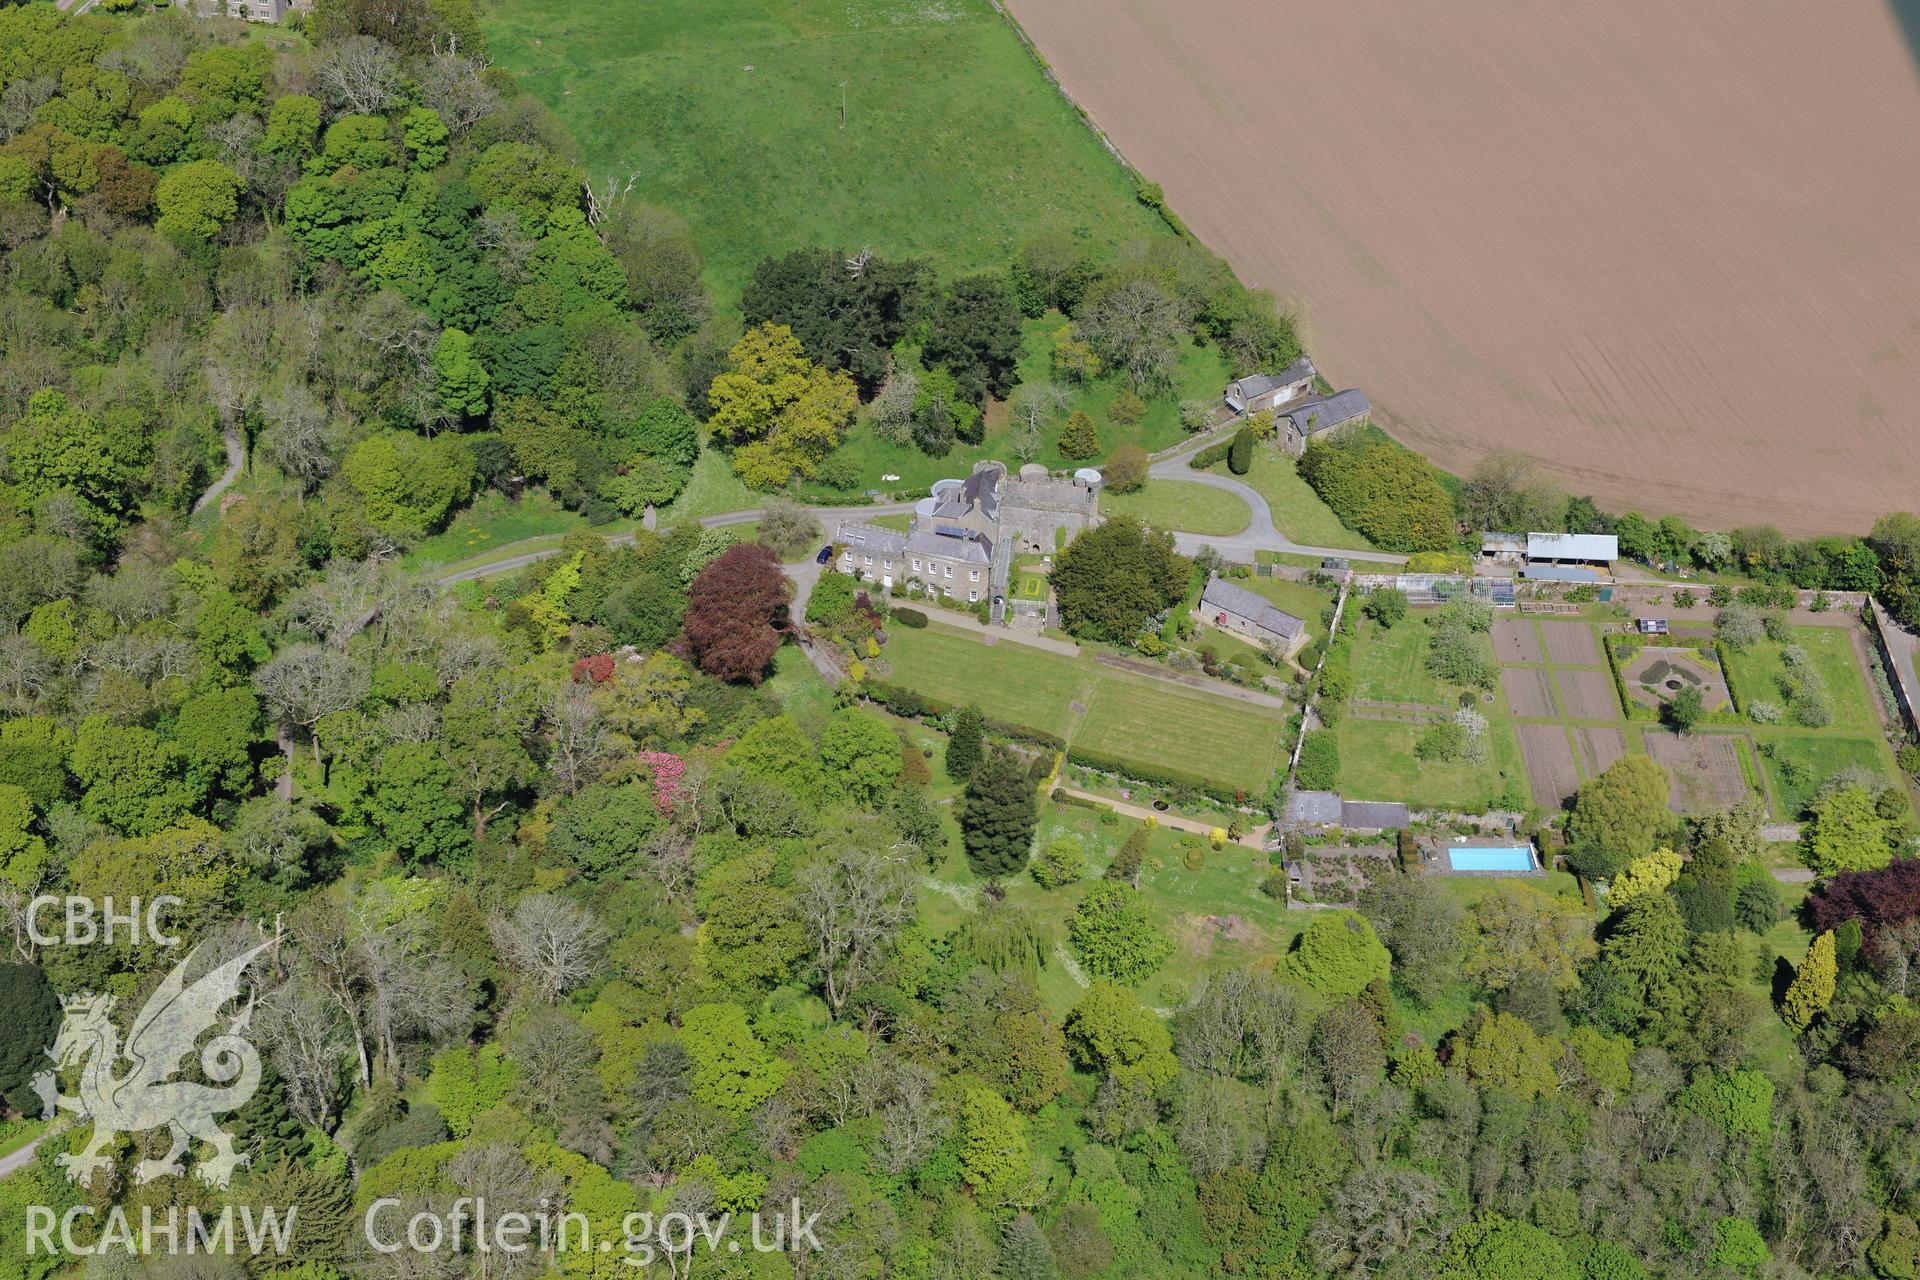 Upton Castle and Gardens, and Upton Chapel, near Cosheston, Pembroke Dock. Oblique aerial photograph taken during the Royal Commission's programme of archaeological aerial reconnaissance by Toby Driver on 13th May 2015.